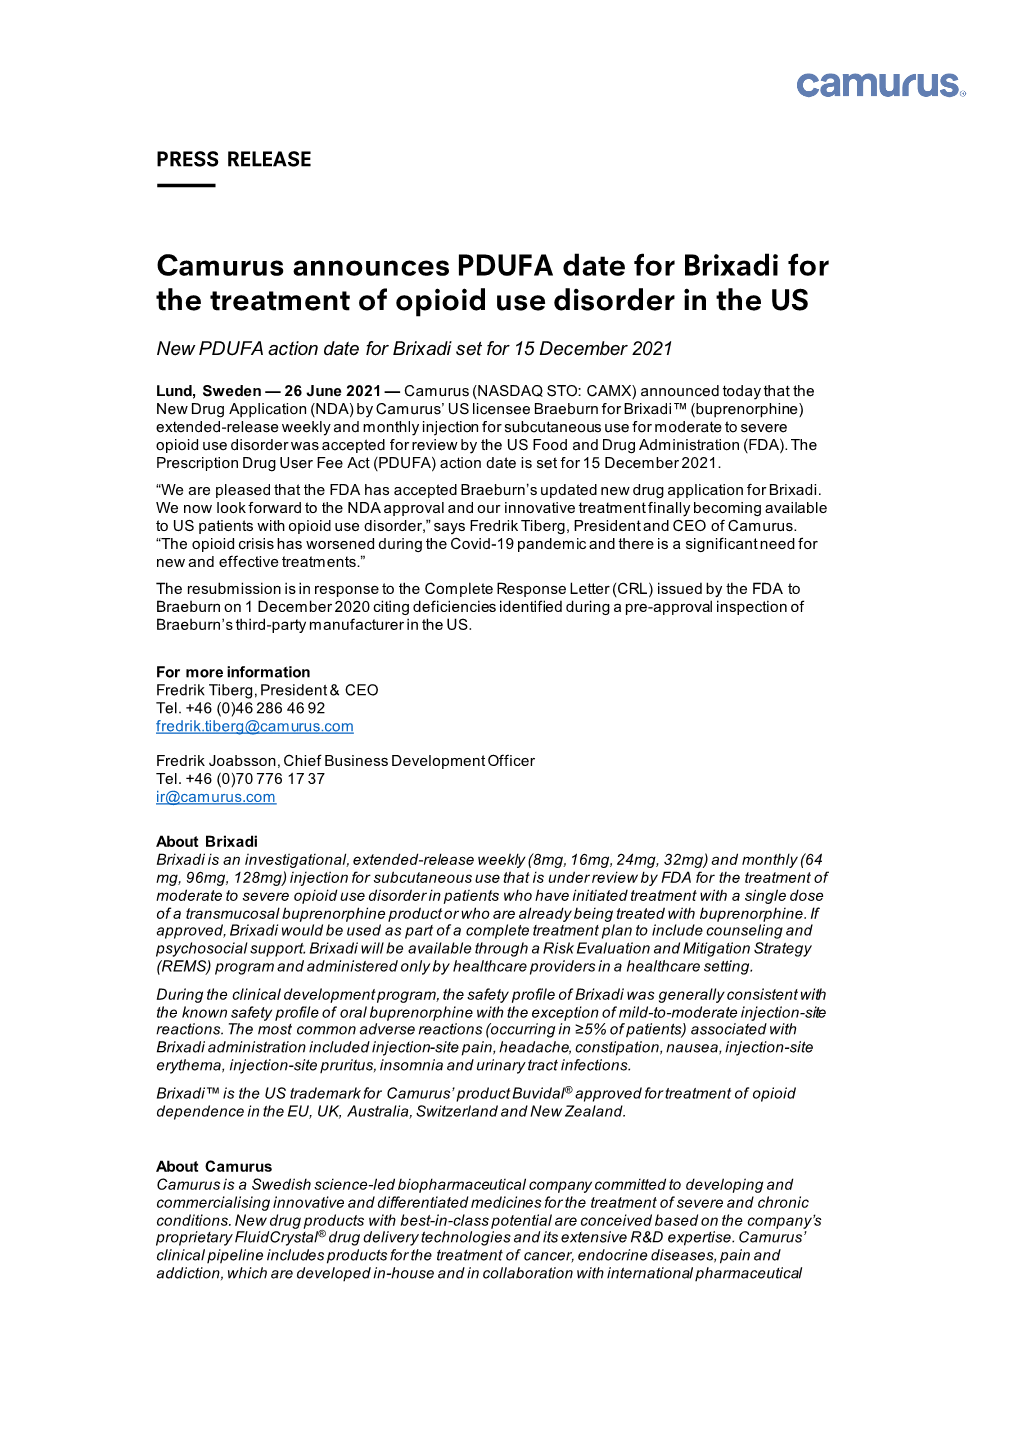 Camurus Announces PDUFA Date for Brixadi for the Treatment of Opioid Use Disorder in the US